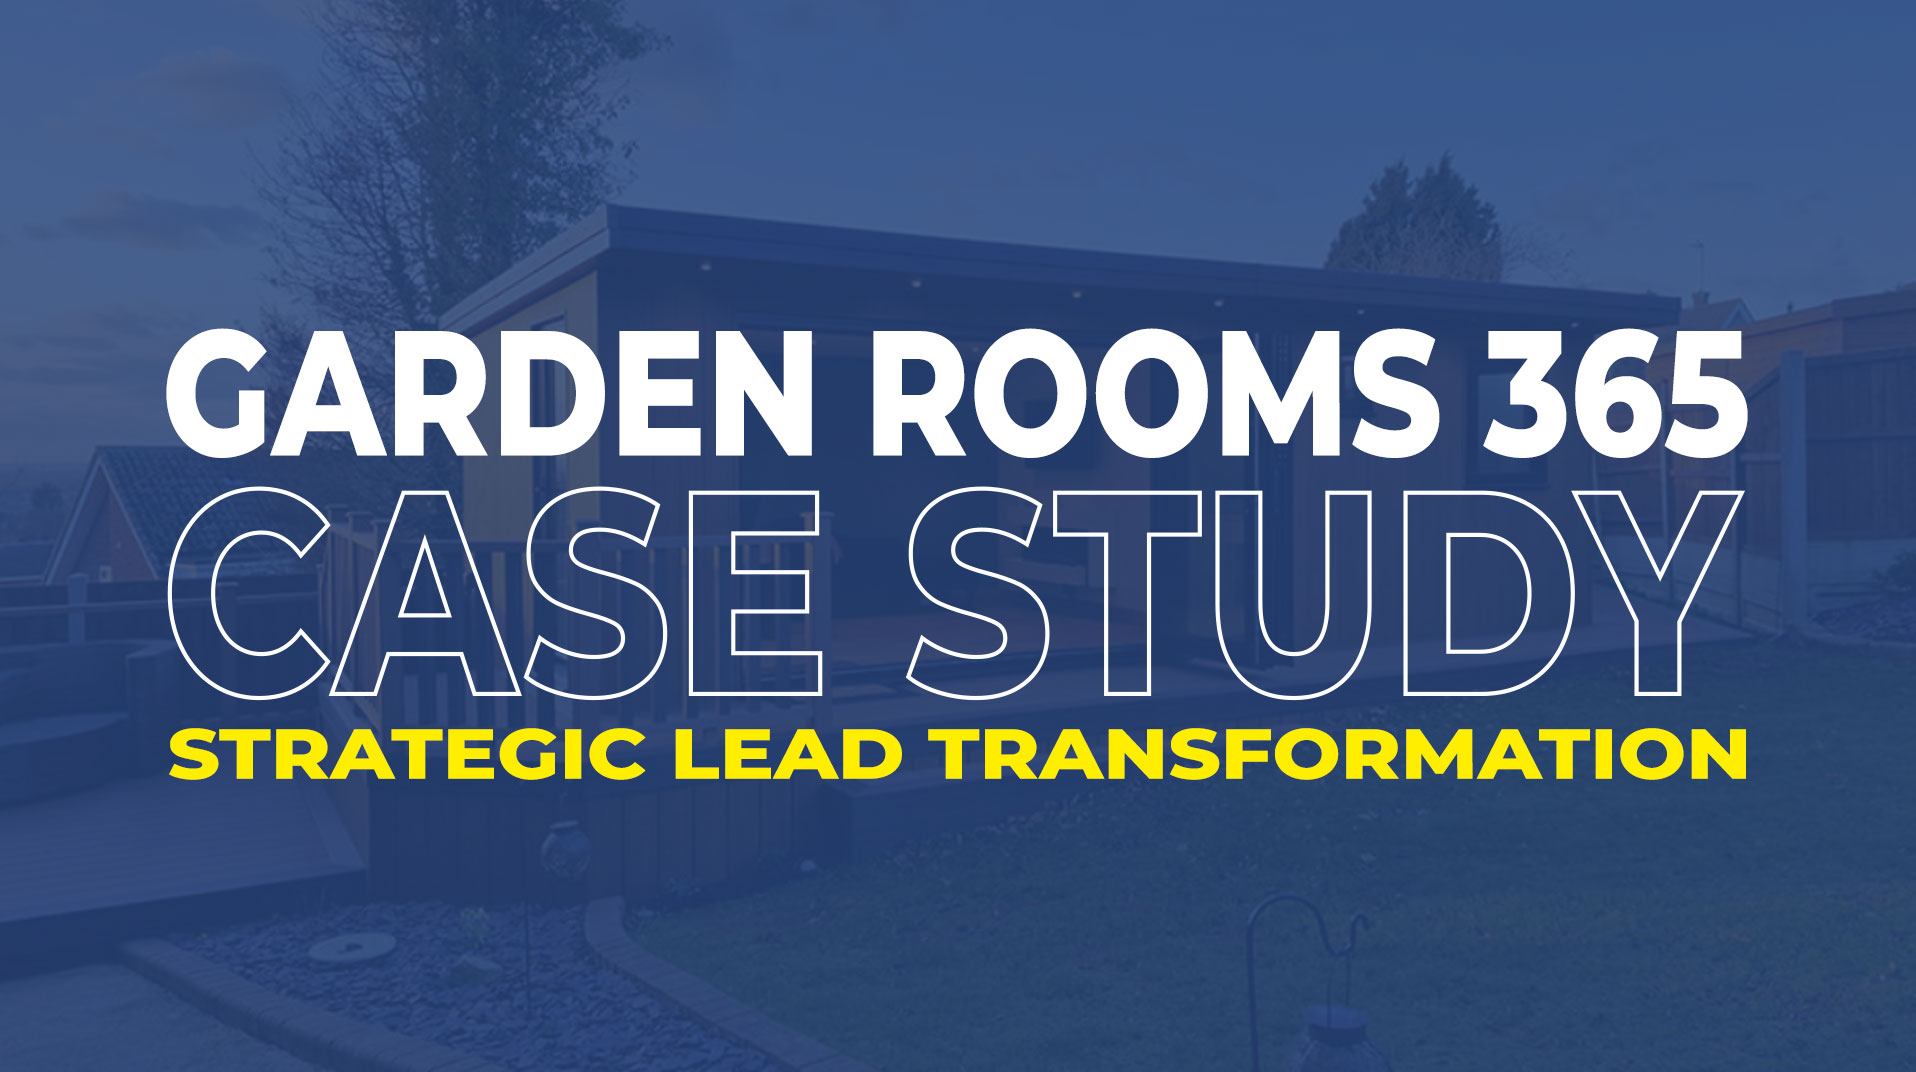 Transforming Leads for Garden Rooms 365: A Strategic Growth Case Study